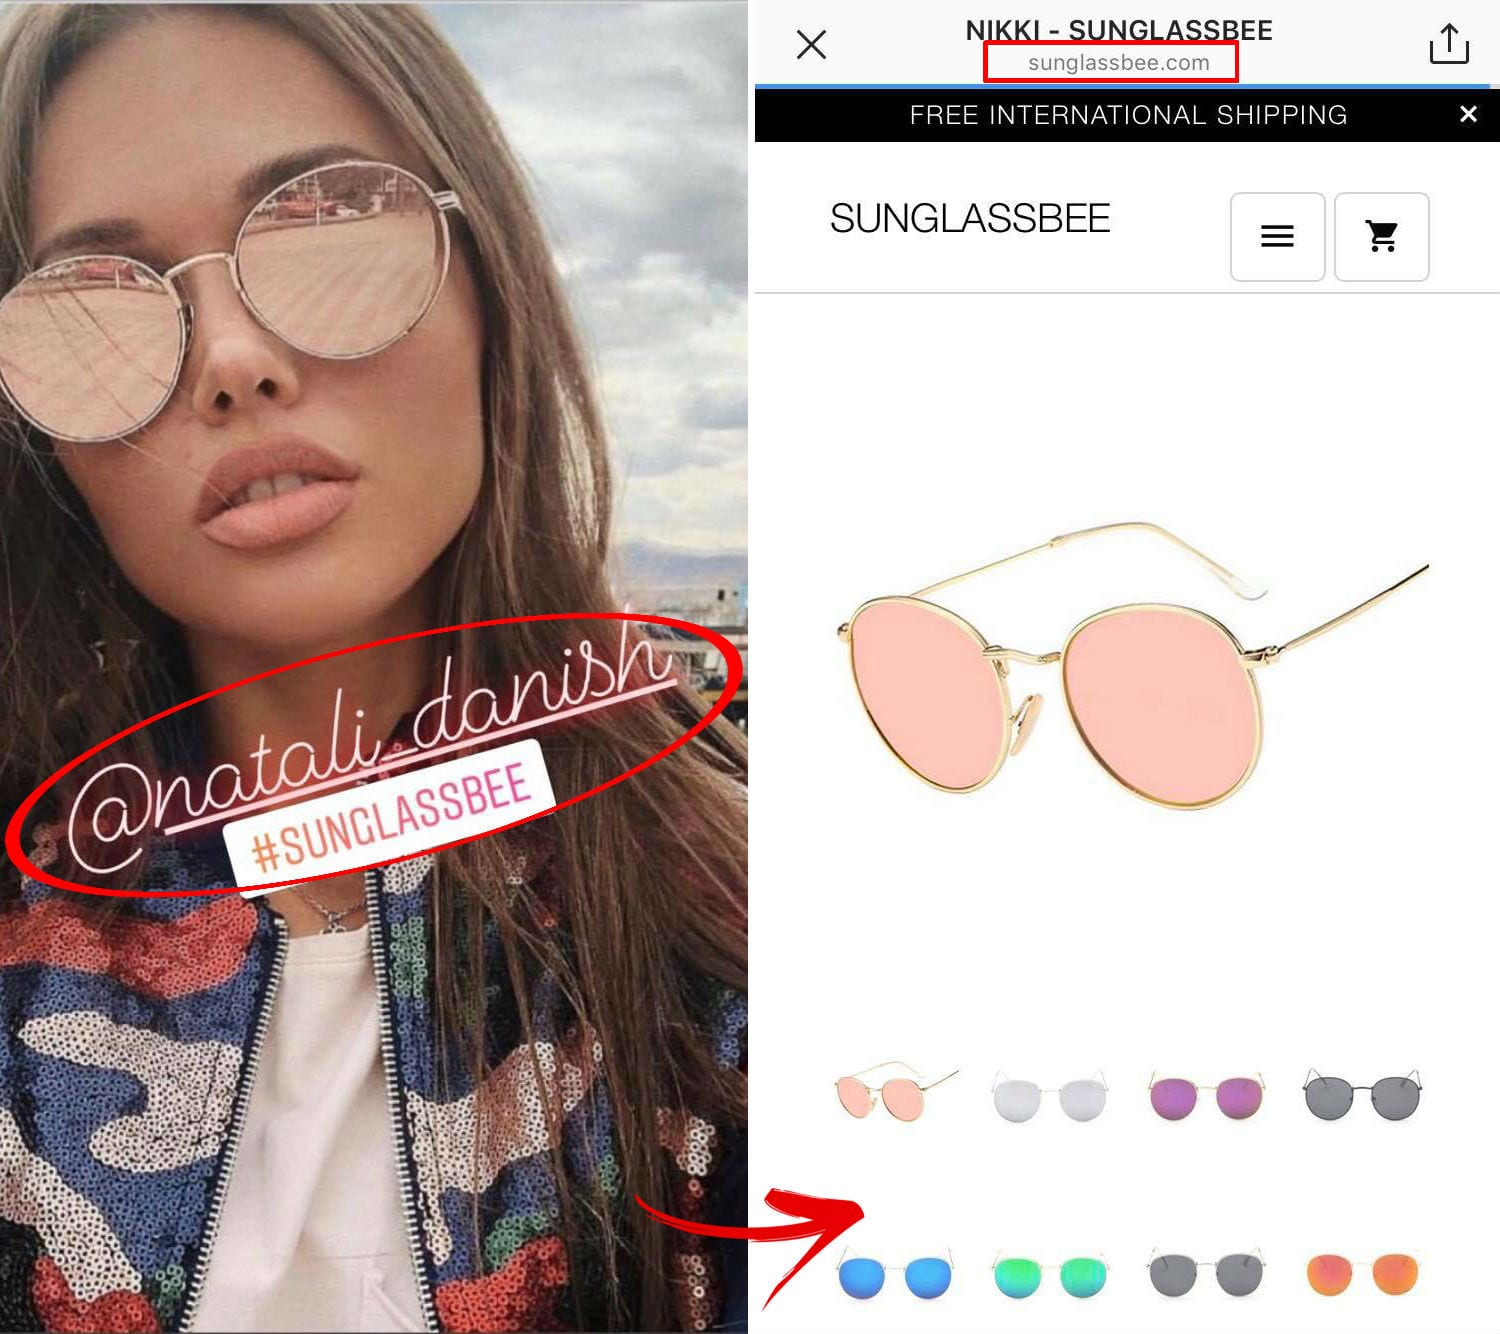 Influencers Sunglassbee - Cracking Instagram's Code with Ephemeral Content